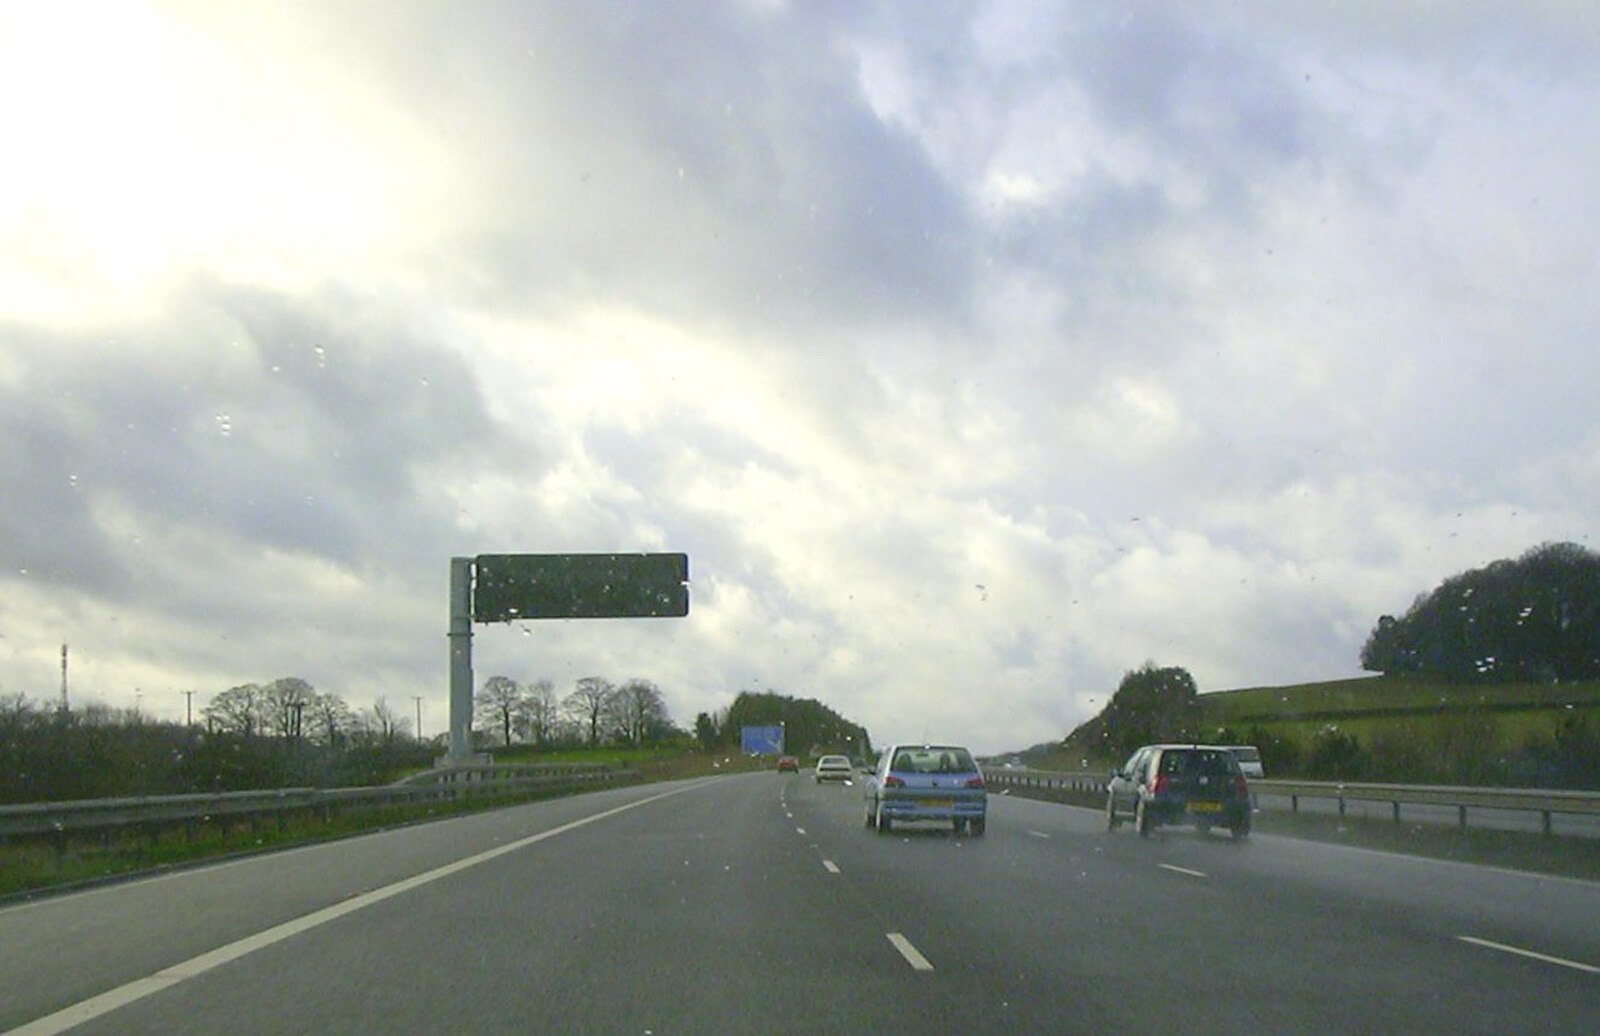 The A14 is full of mid-lane tossers again from Bathroom Rebuilding, Brome, Suffolk - 1st February 2002